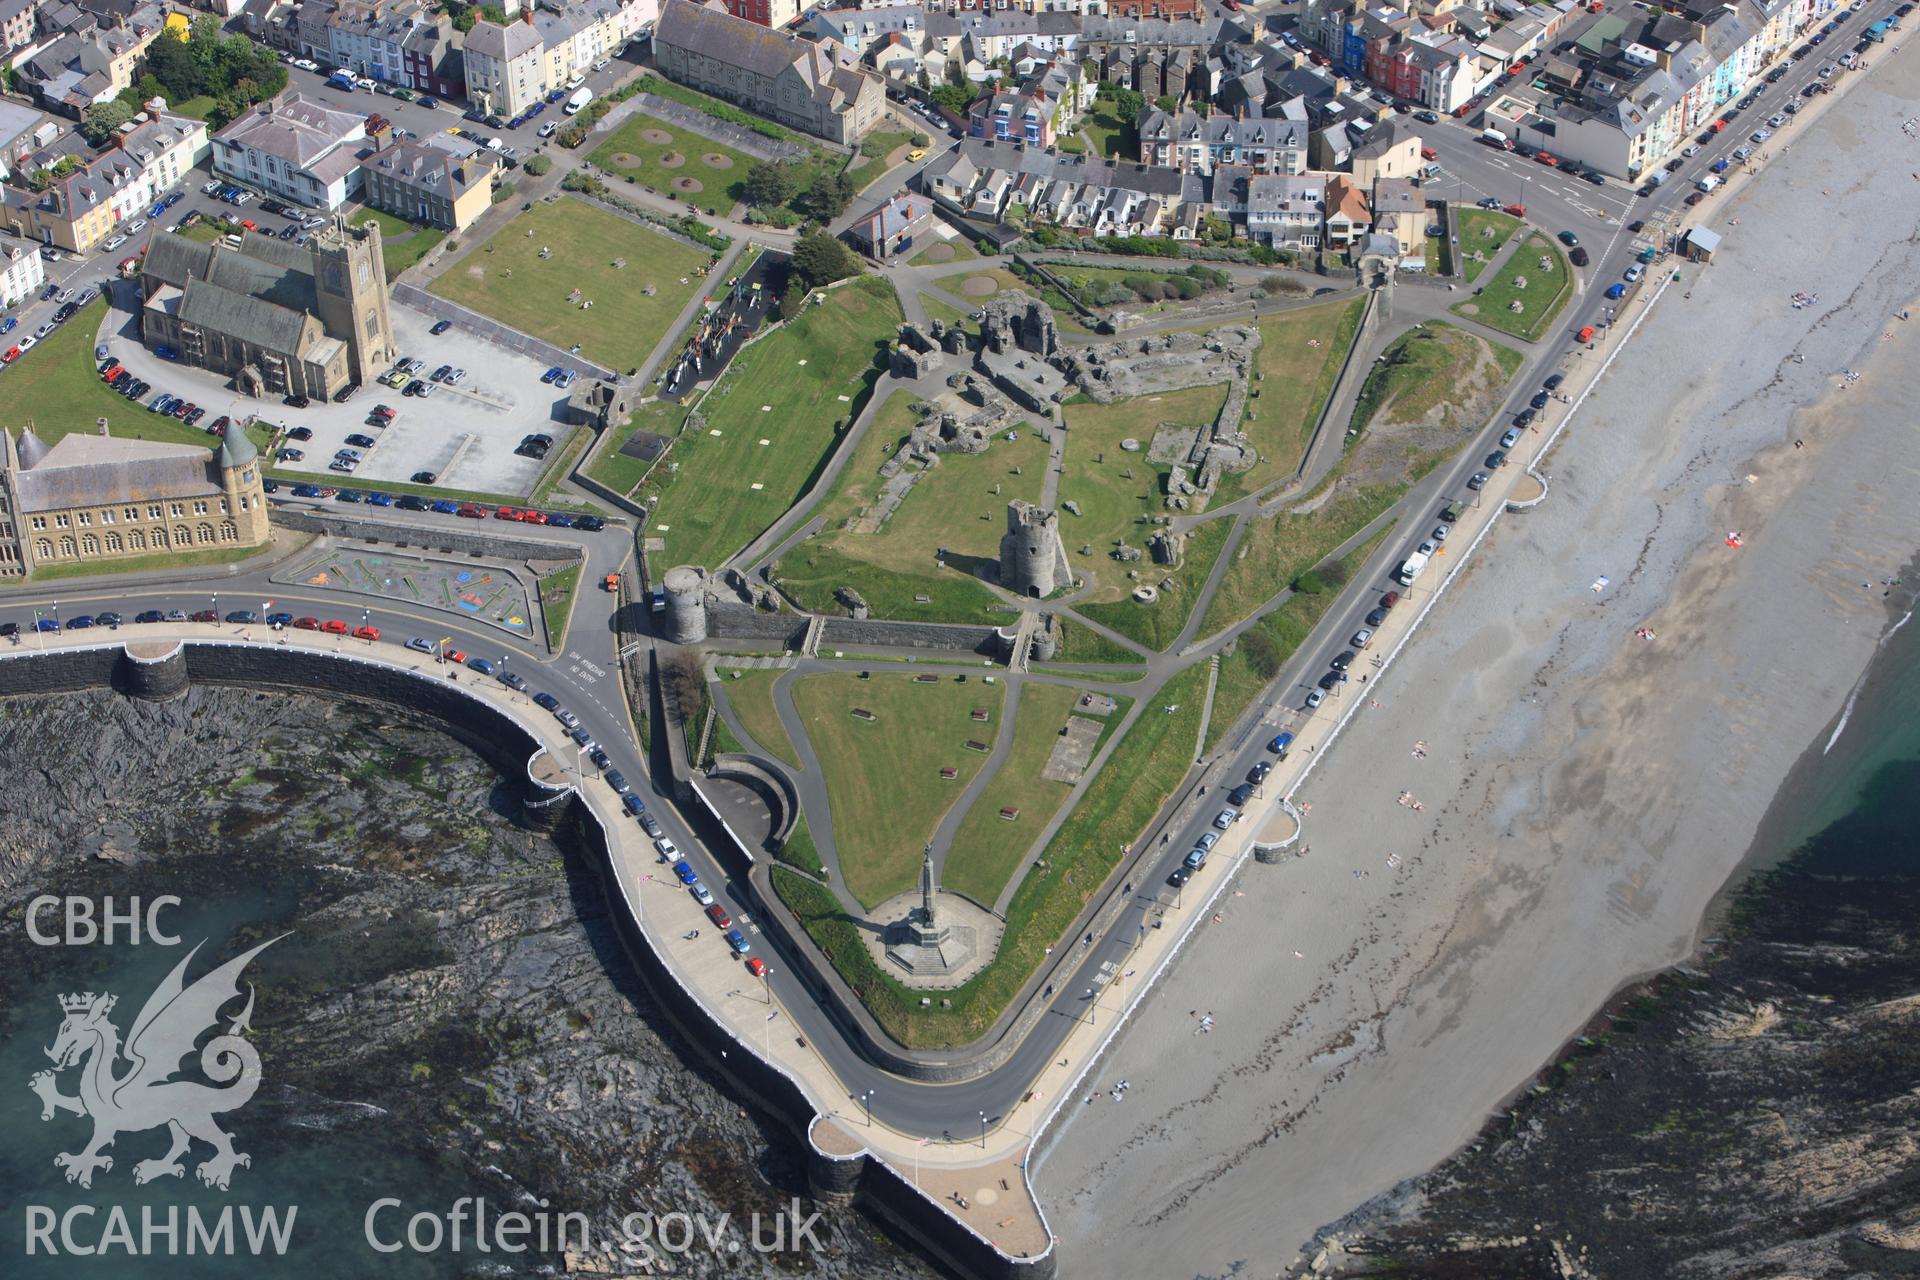 RCAHMW colour oblique photograph of Aberystwyth Castle. Taken by Toby Driver on 25/05/2010.